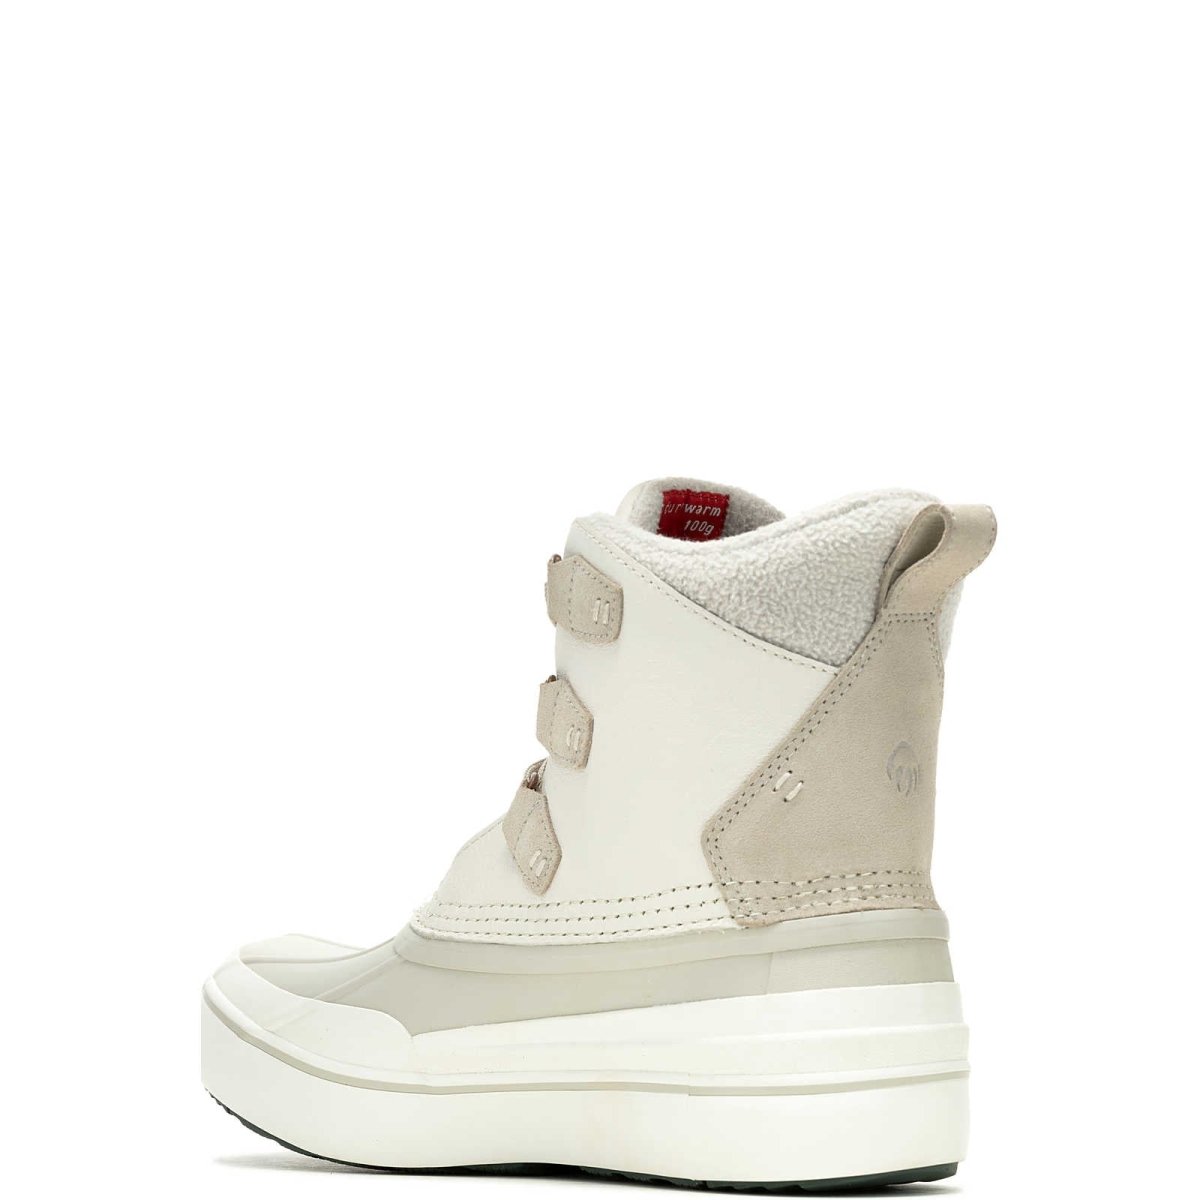 WOLVERINE TORRENT CHUKKA WOMEN'S WATERPROOF BOOT (W880533) IN IVORY - TLW Shoes